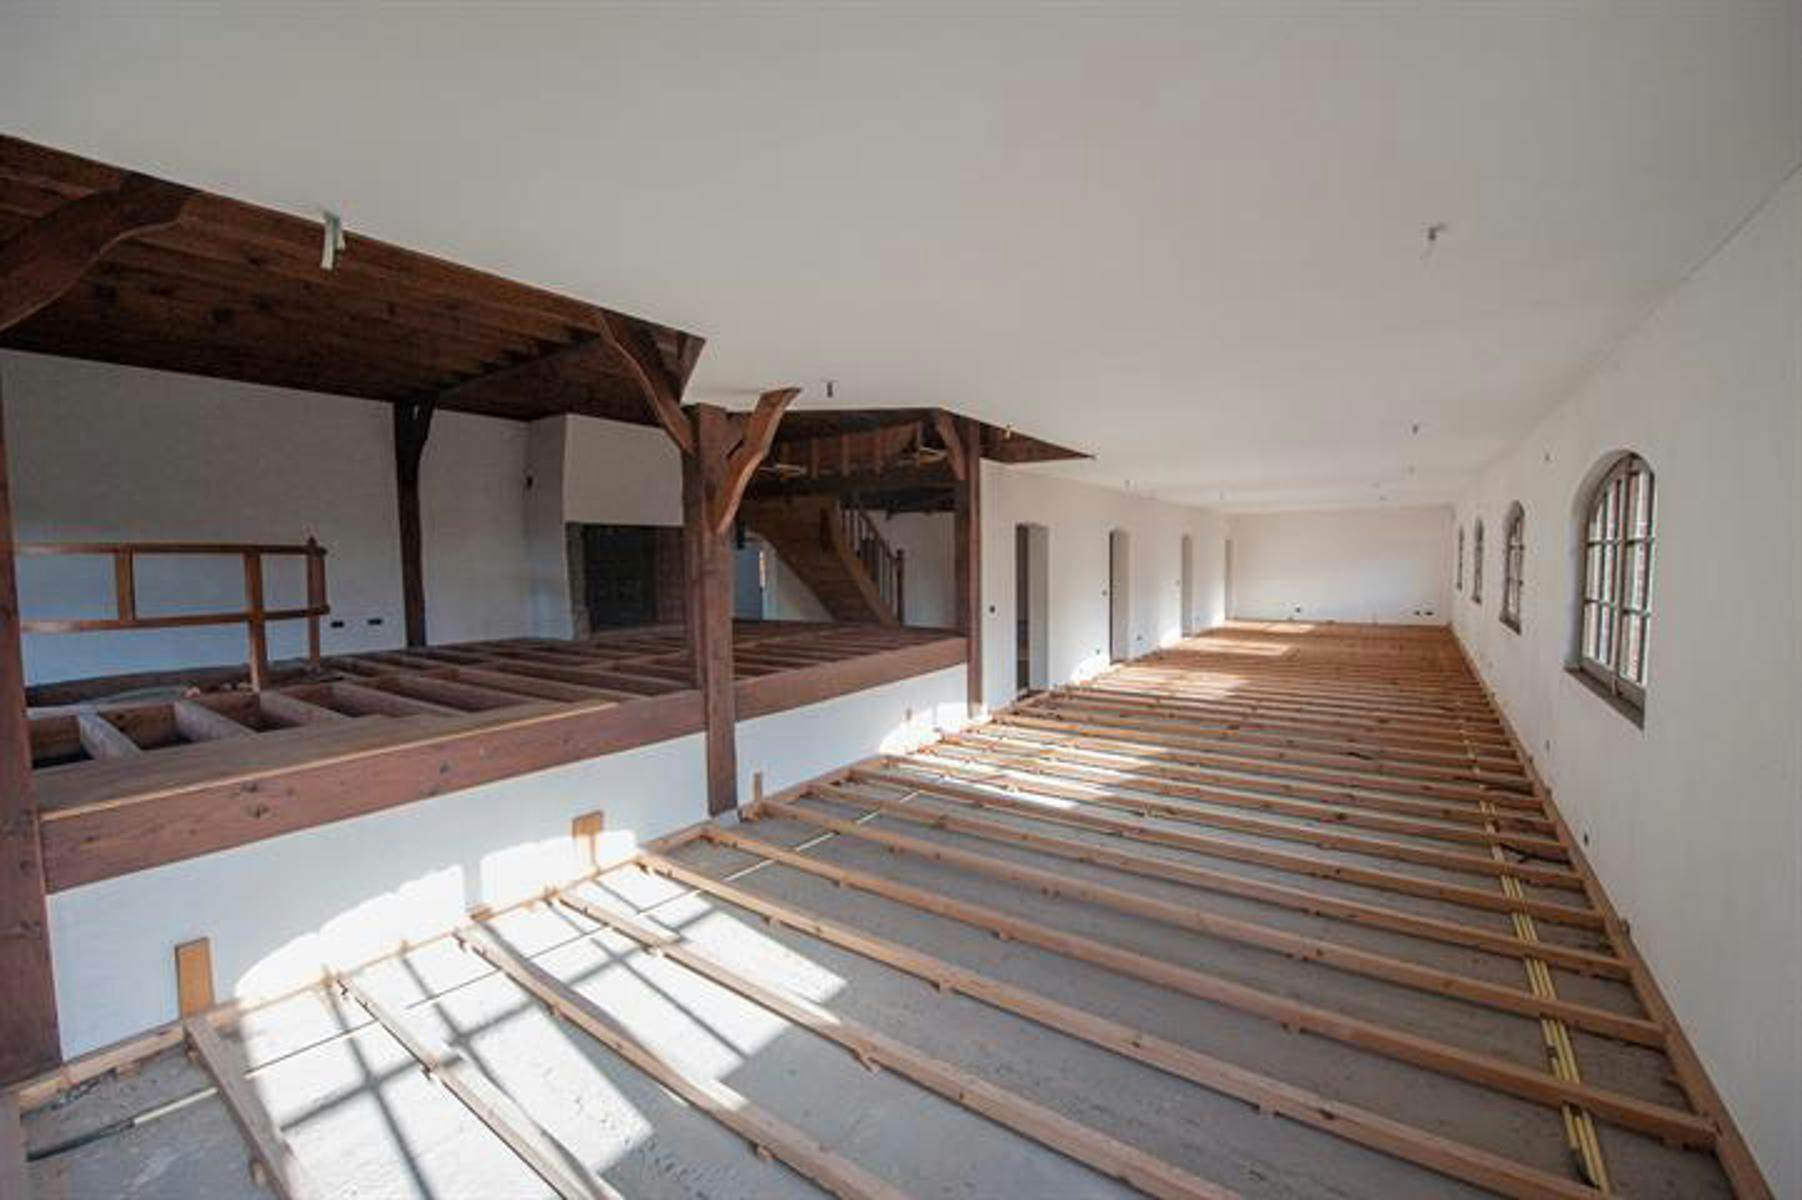 Picture 1 of 4 for Villa farmtype with four bedrooms in Grimbergen Strombeek-Bever